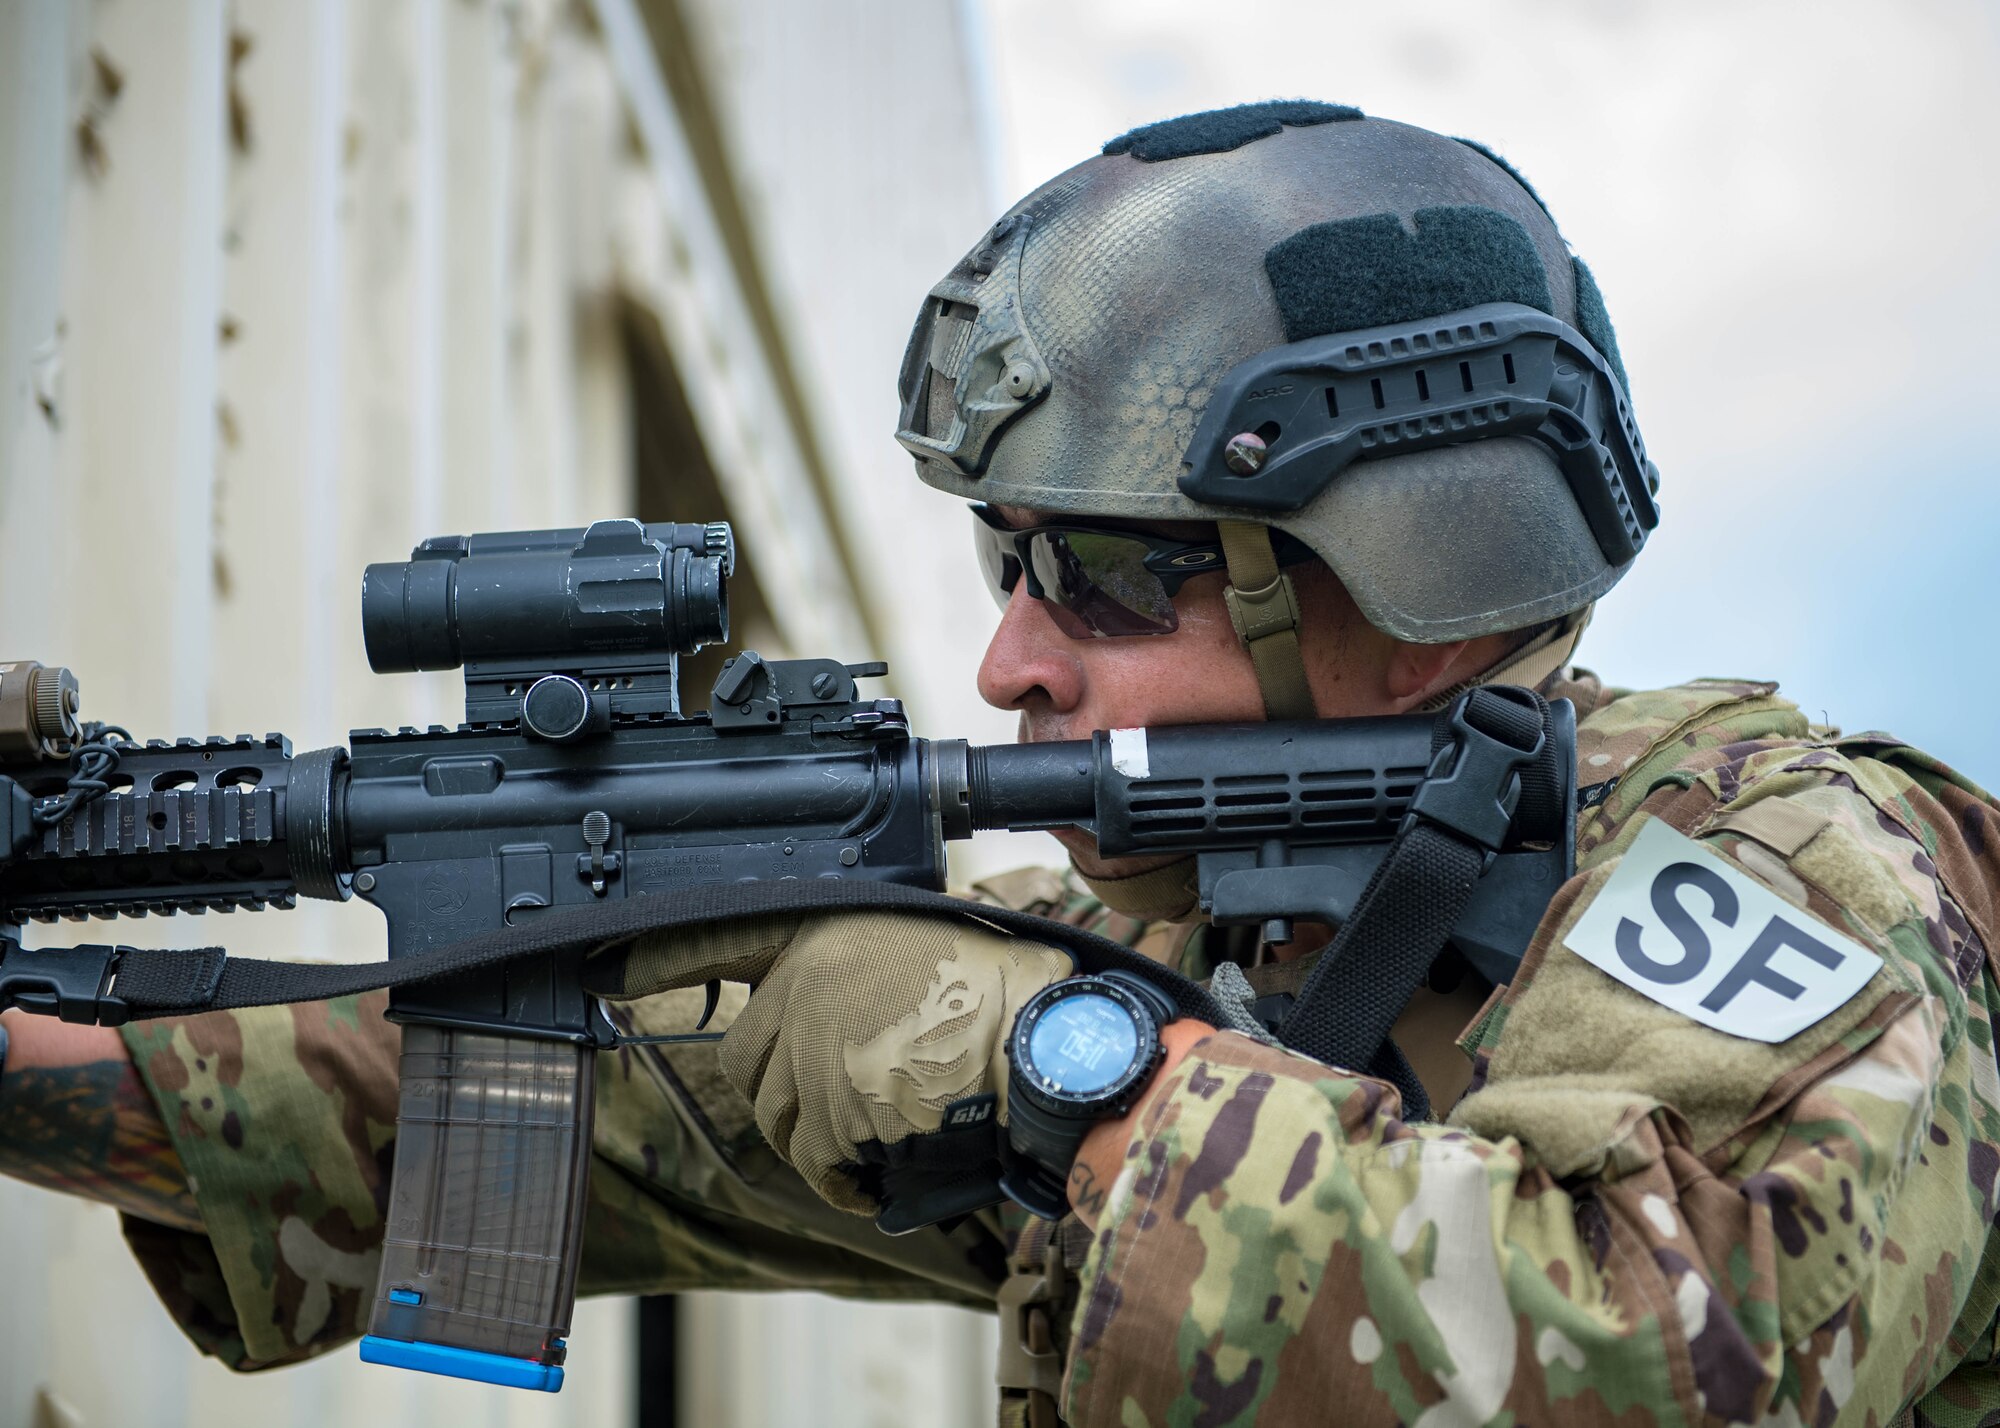 U.S. Air Force Staff Sgt. Paul Rosales, 55th Security Forces Squadron combat arms training and maintenance instructor, clears a building during Air Combat Command’s Defender Challenge team selection at Joint Base Langley-Eustis, Virginia, August 20, 2018.